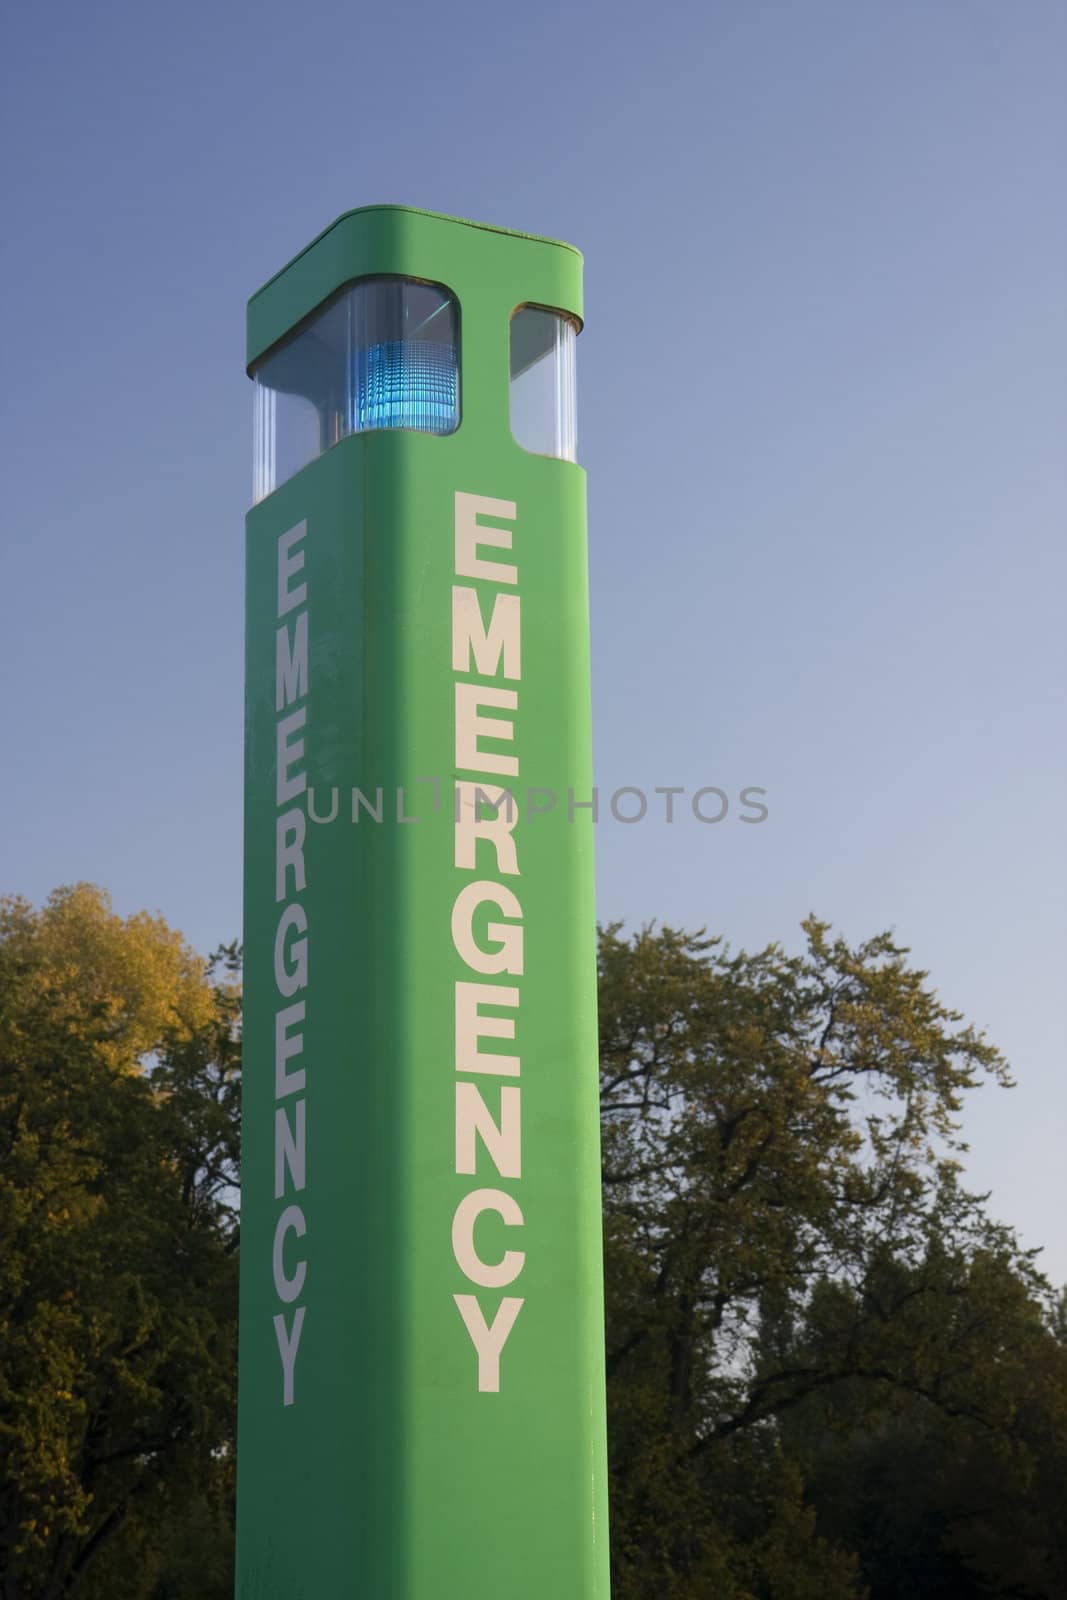 emergency calling box (upper part) at university campus against trees and sky